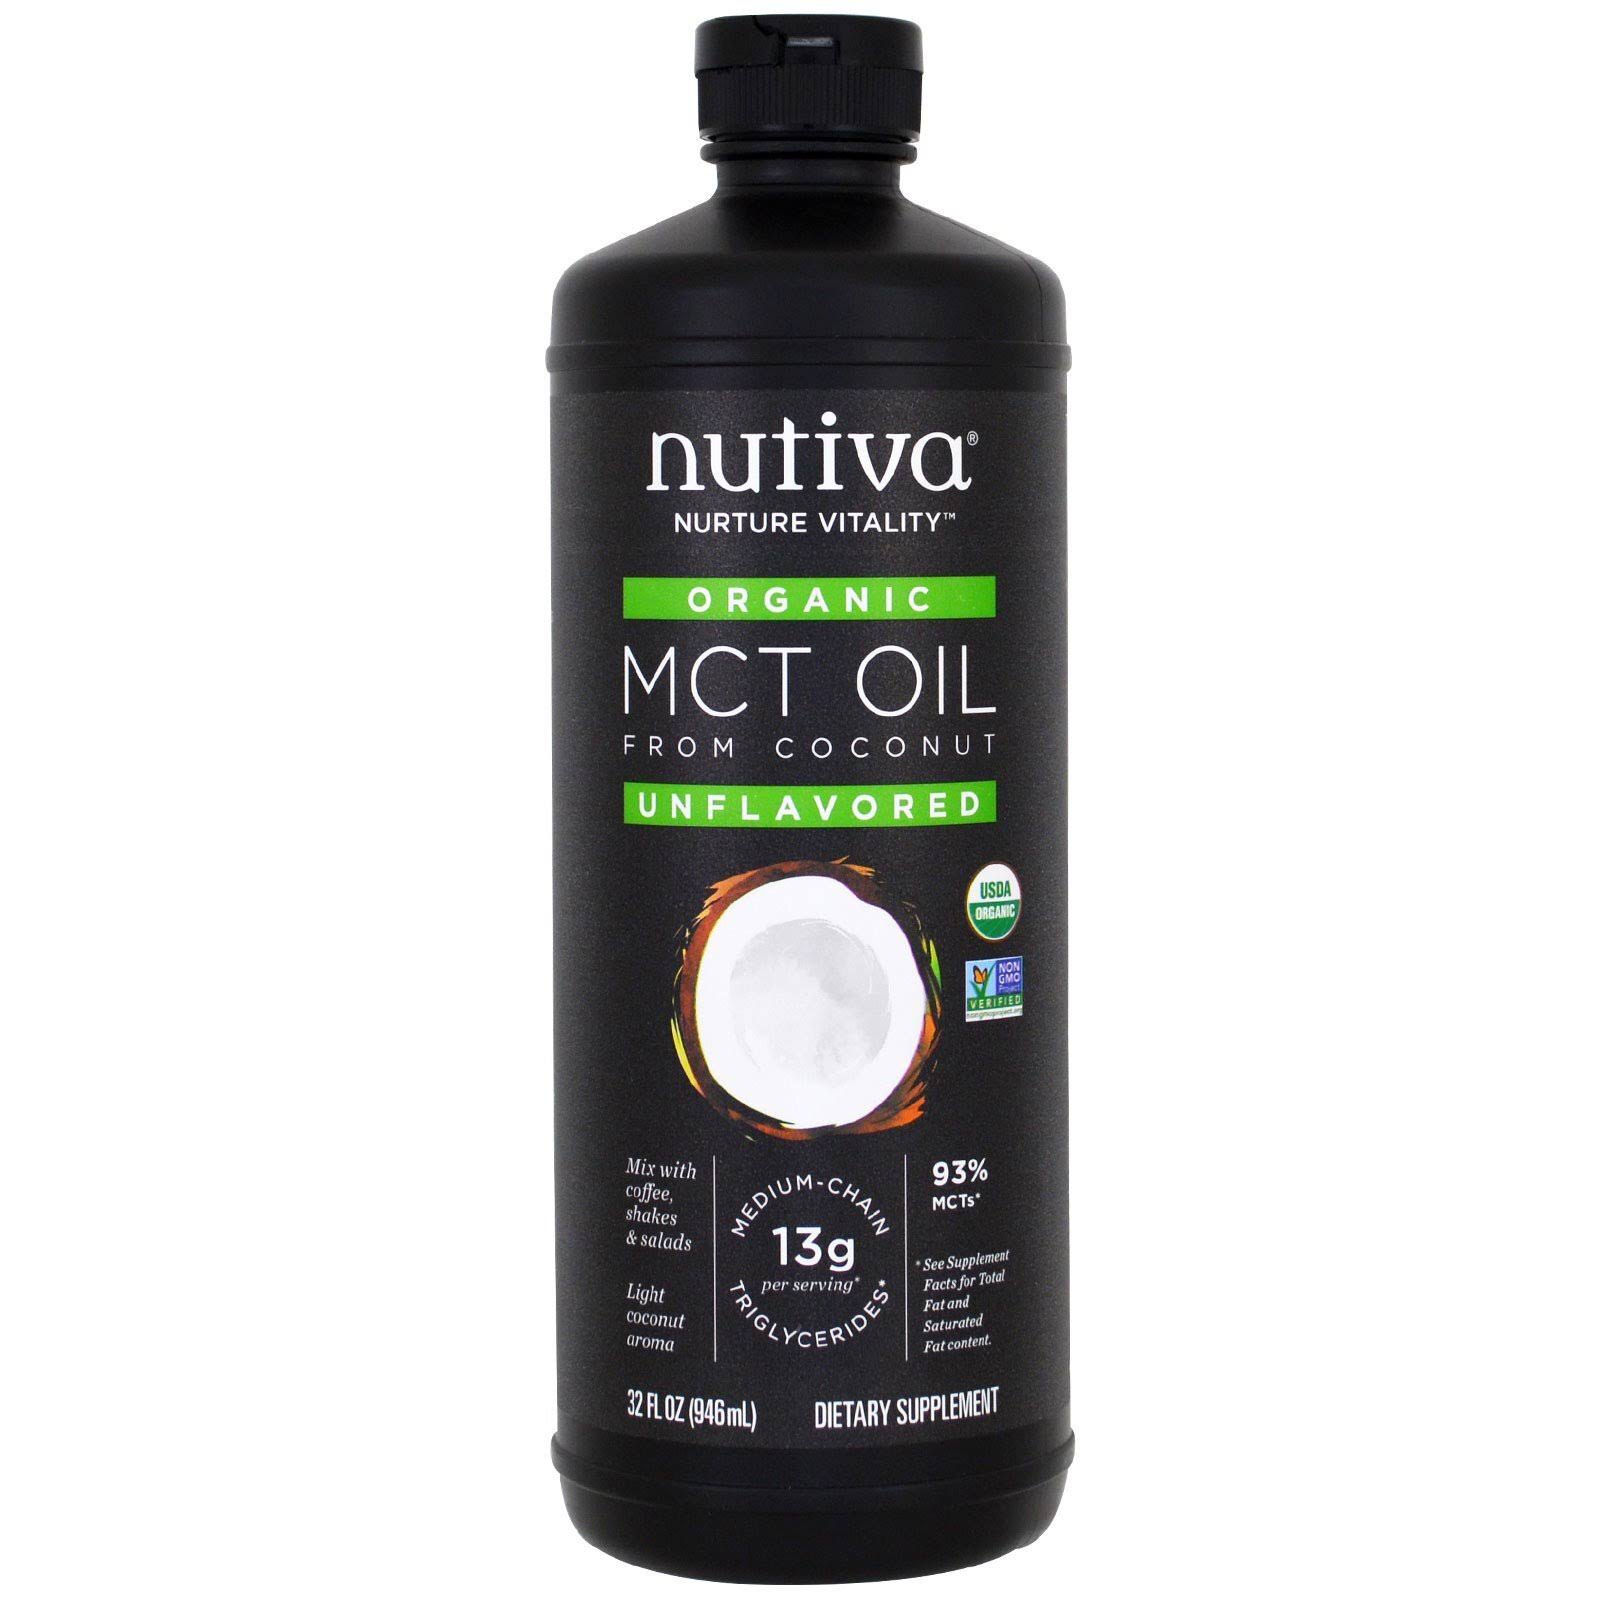 Nutiva Organic MCT Oil From Coconut Unflavored 32 fl oz 946 ml